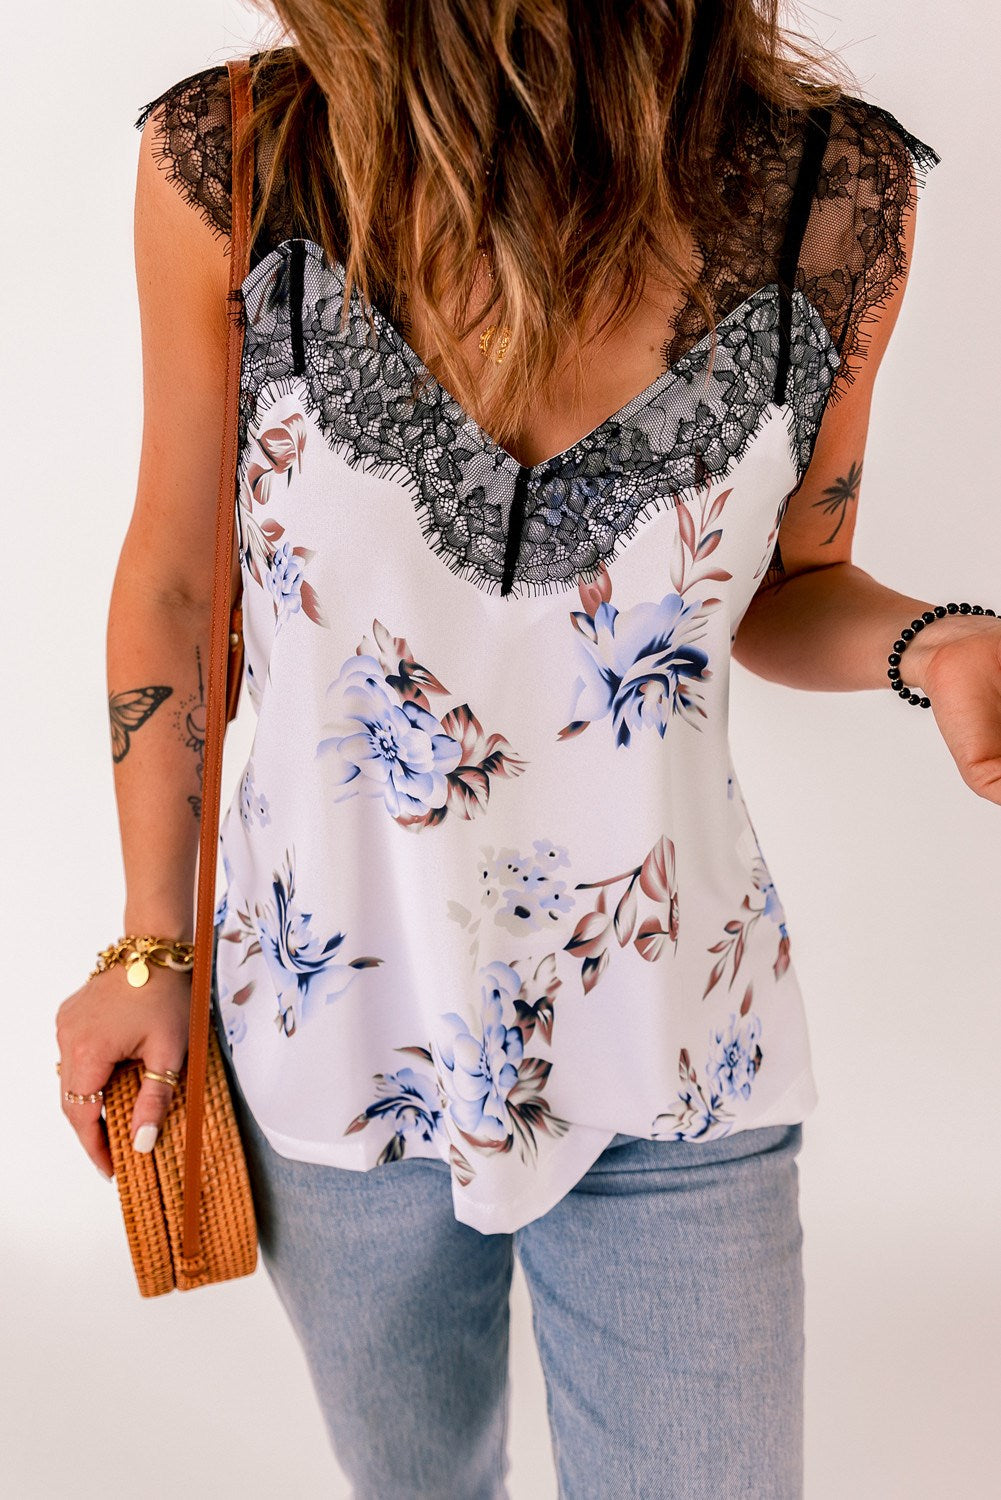 Sweet Lace Floral Tank